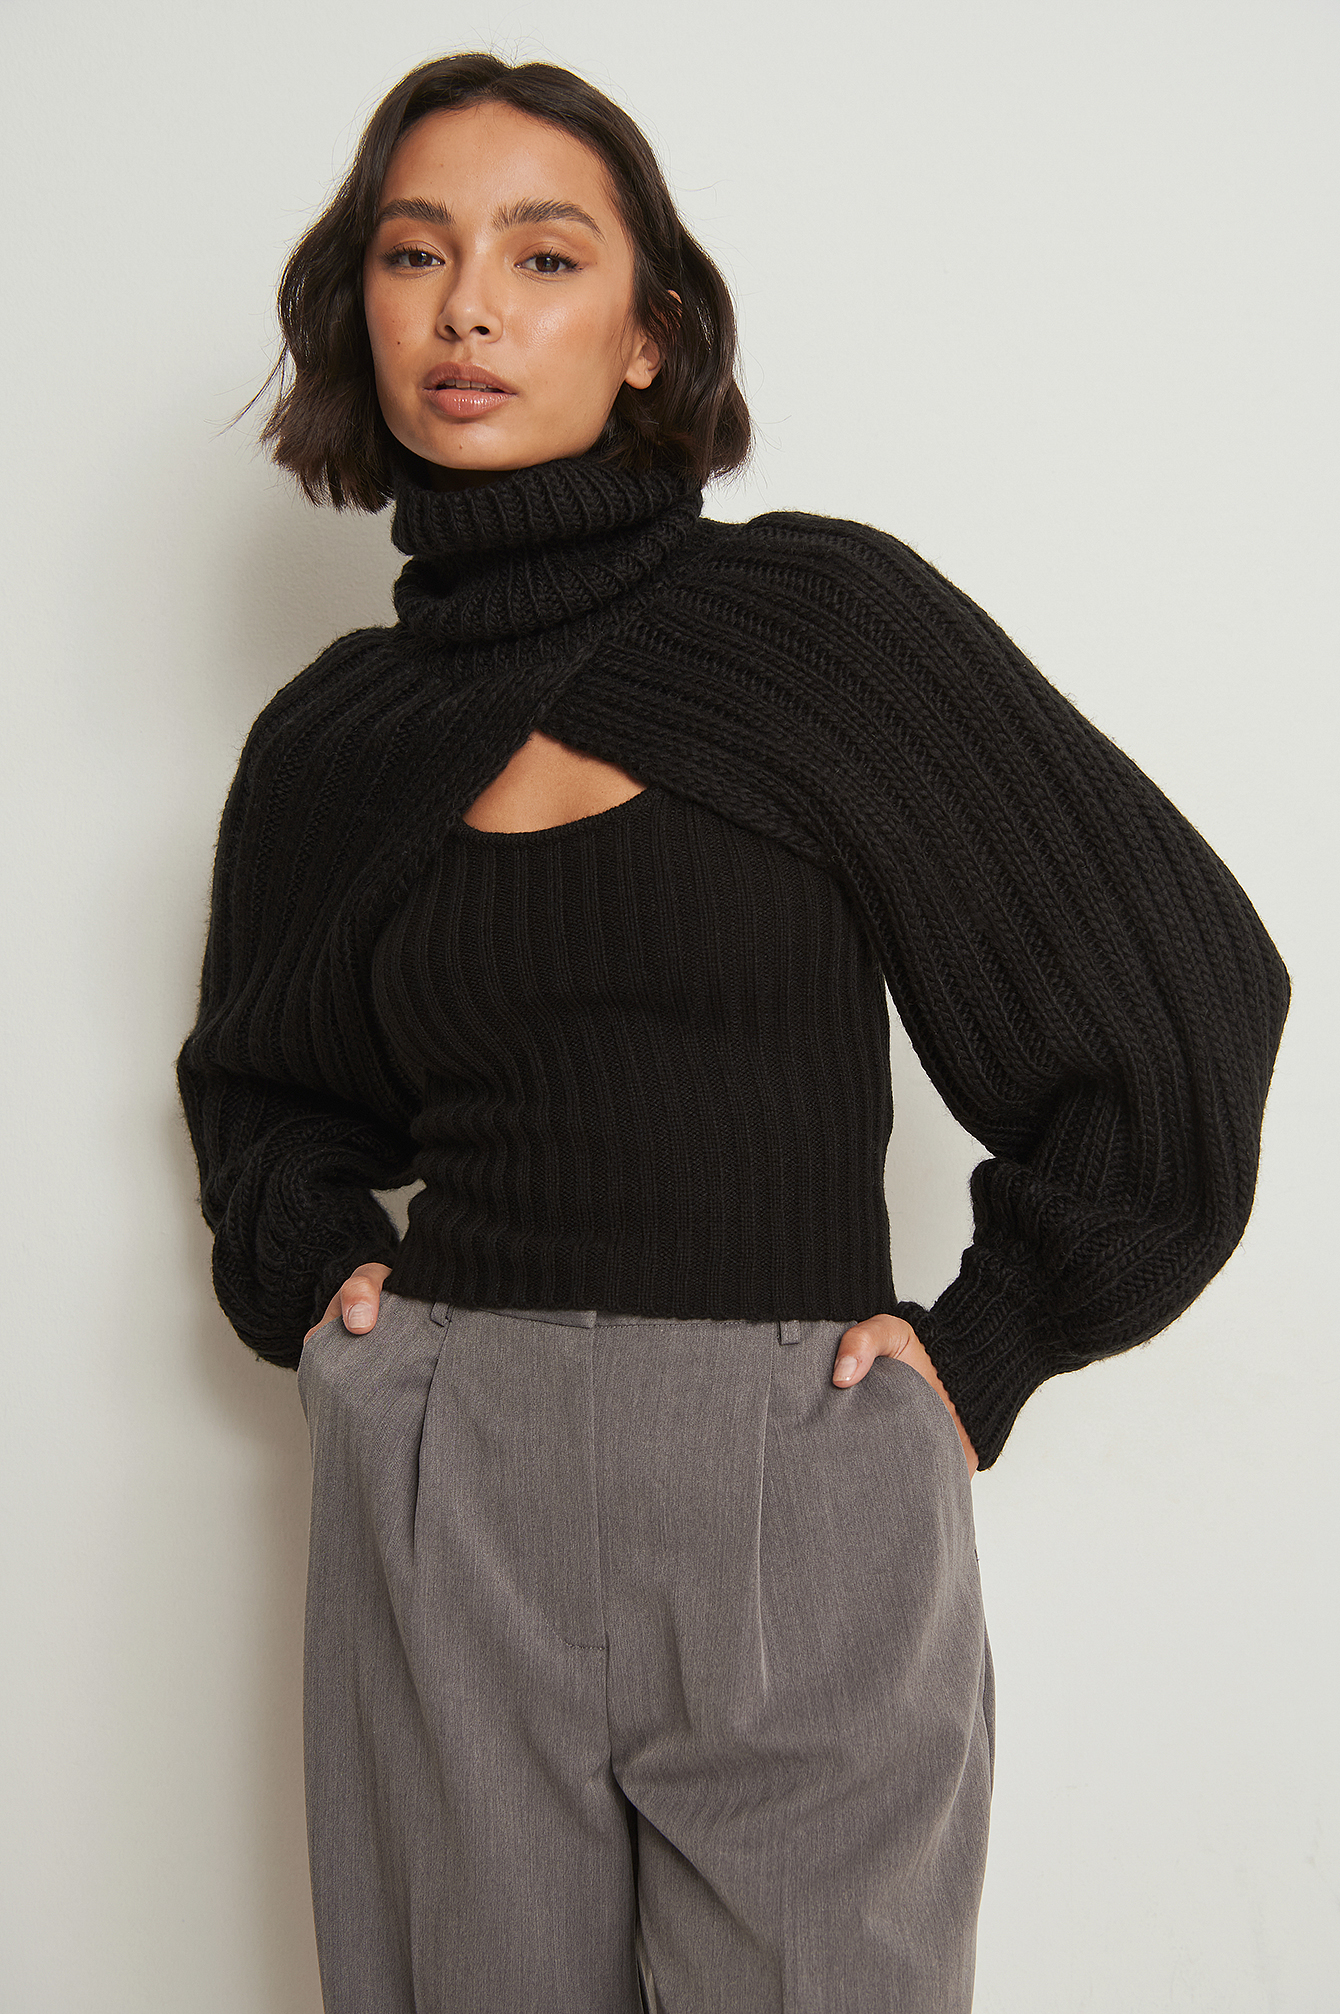 Black Knitted Turtle Neck Supercropped Cardigan